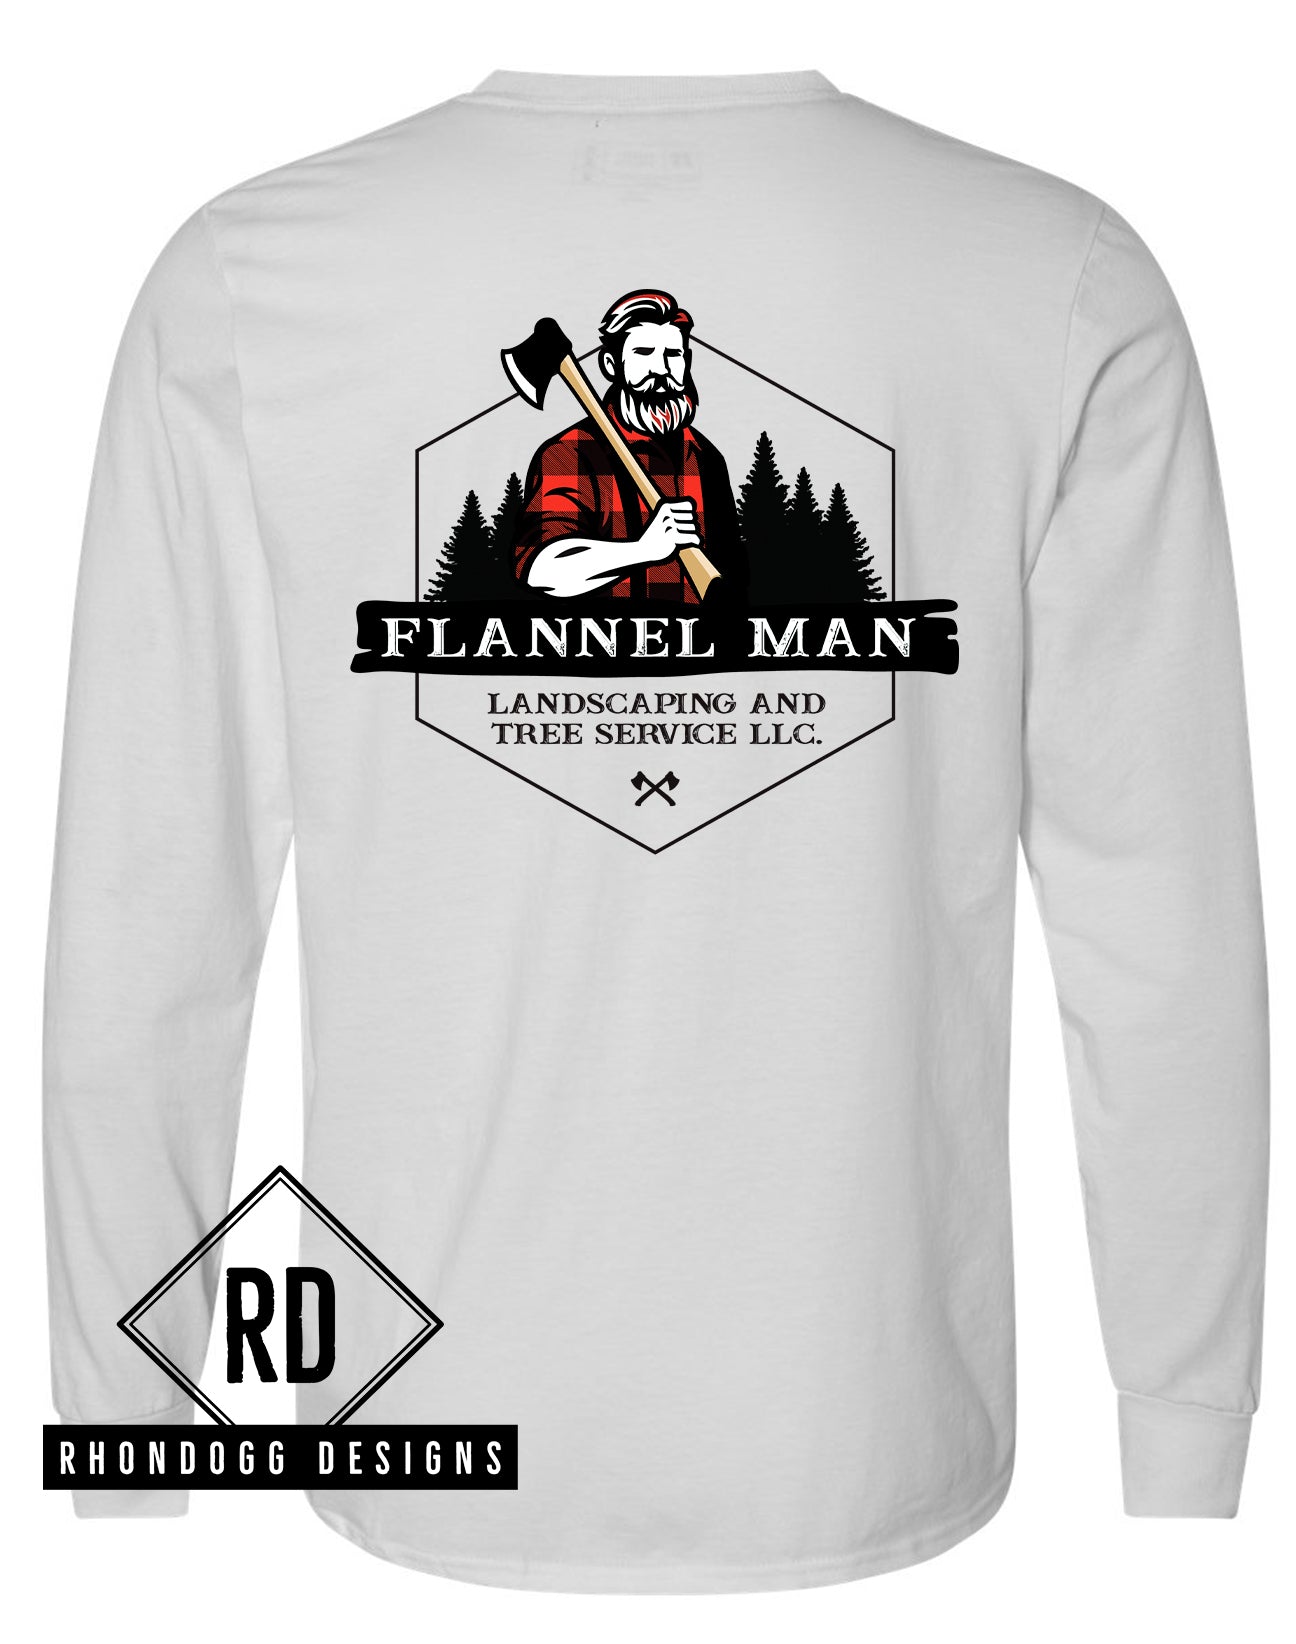 Flannel Man - Russell Athletic Long Sleeve T-Shirt